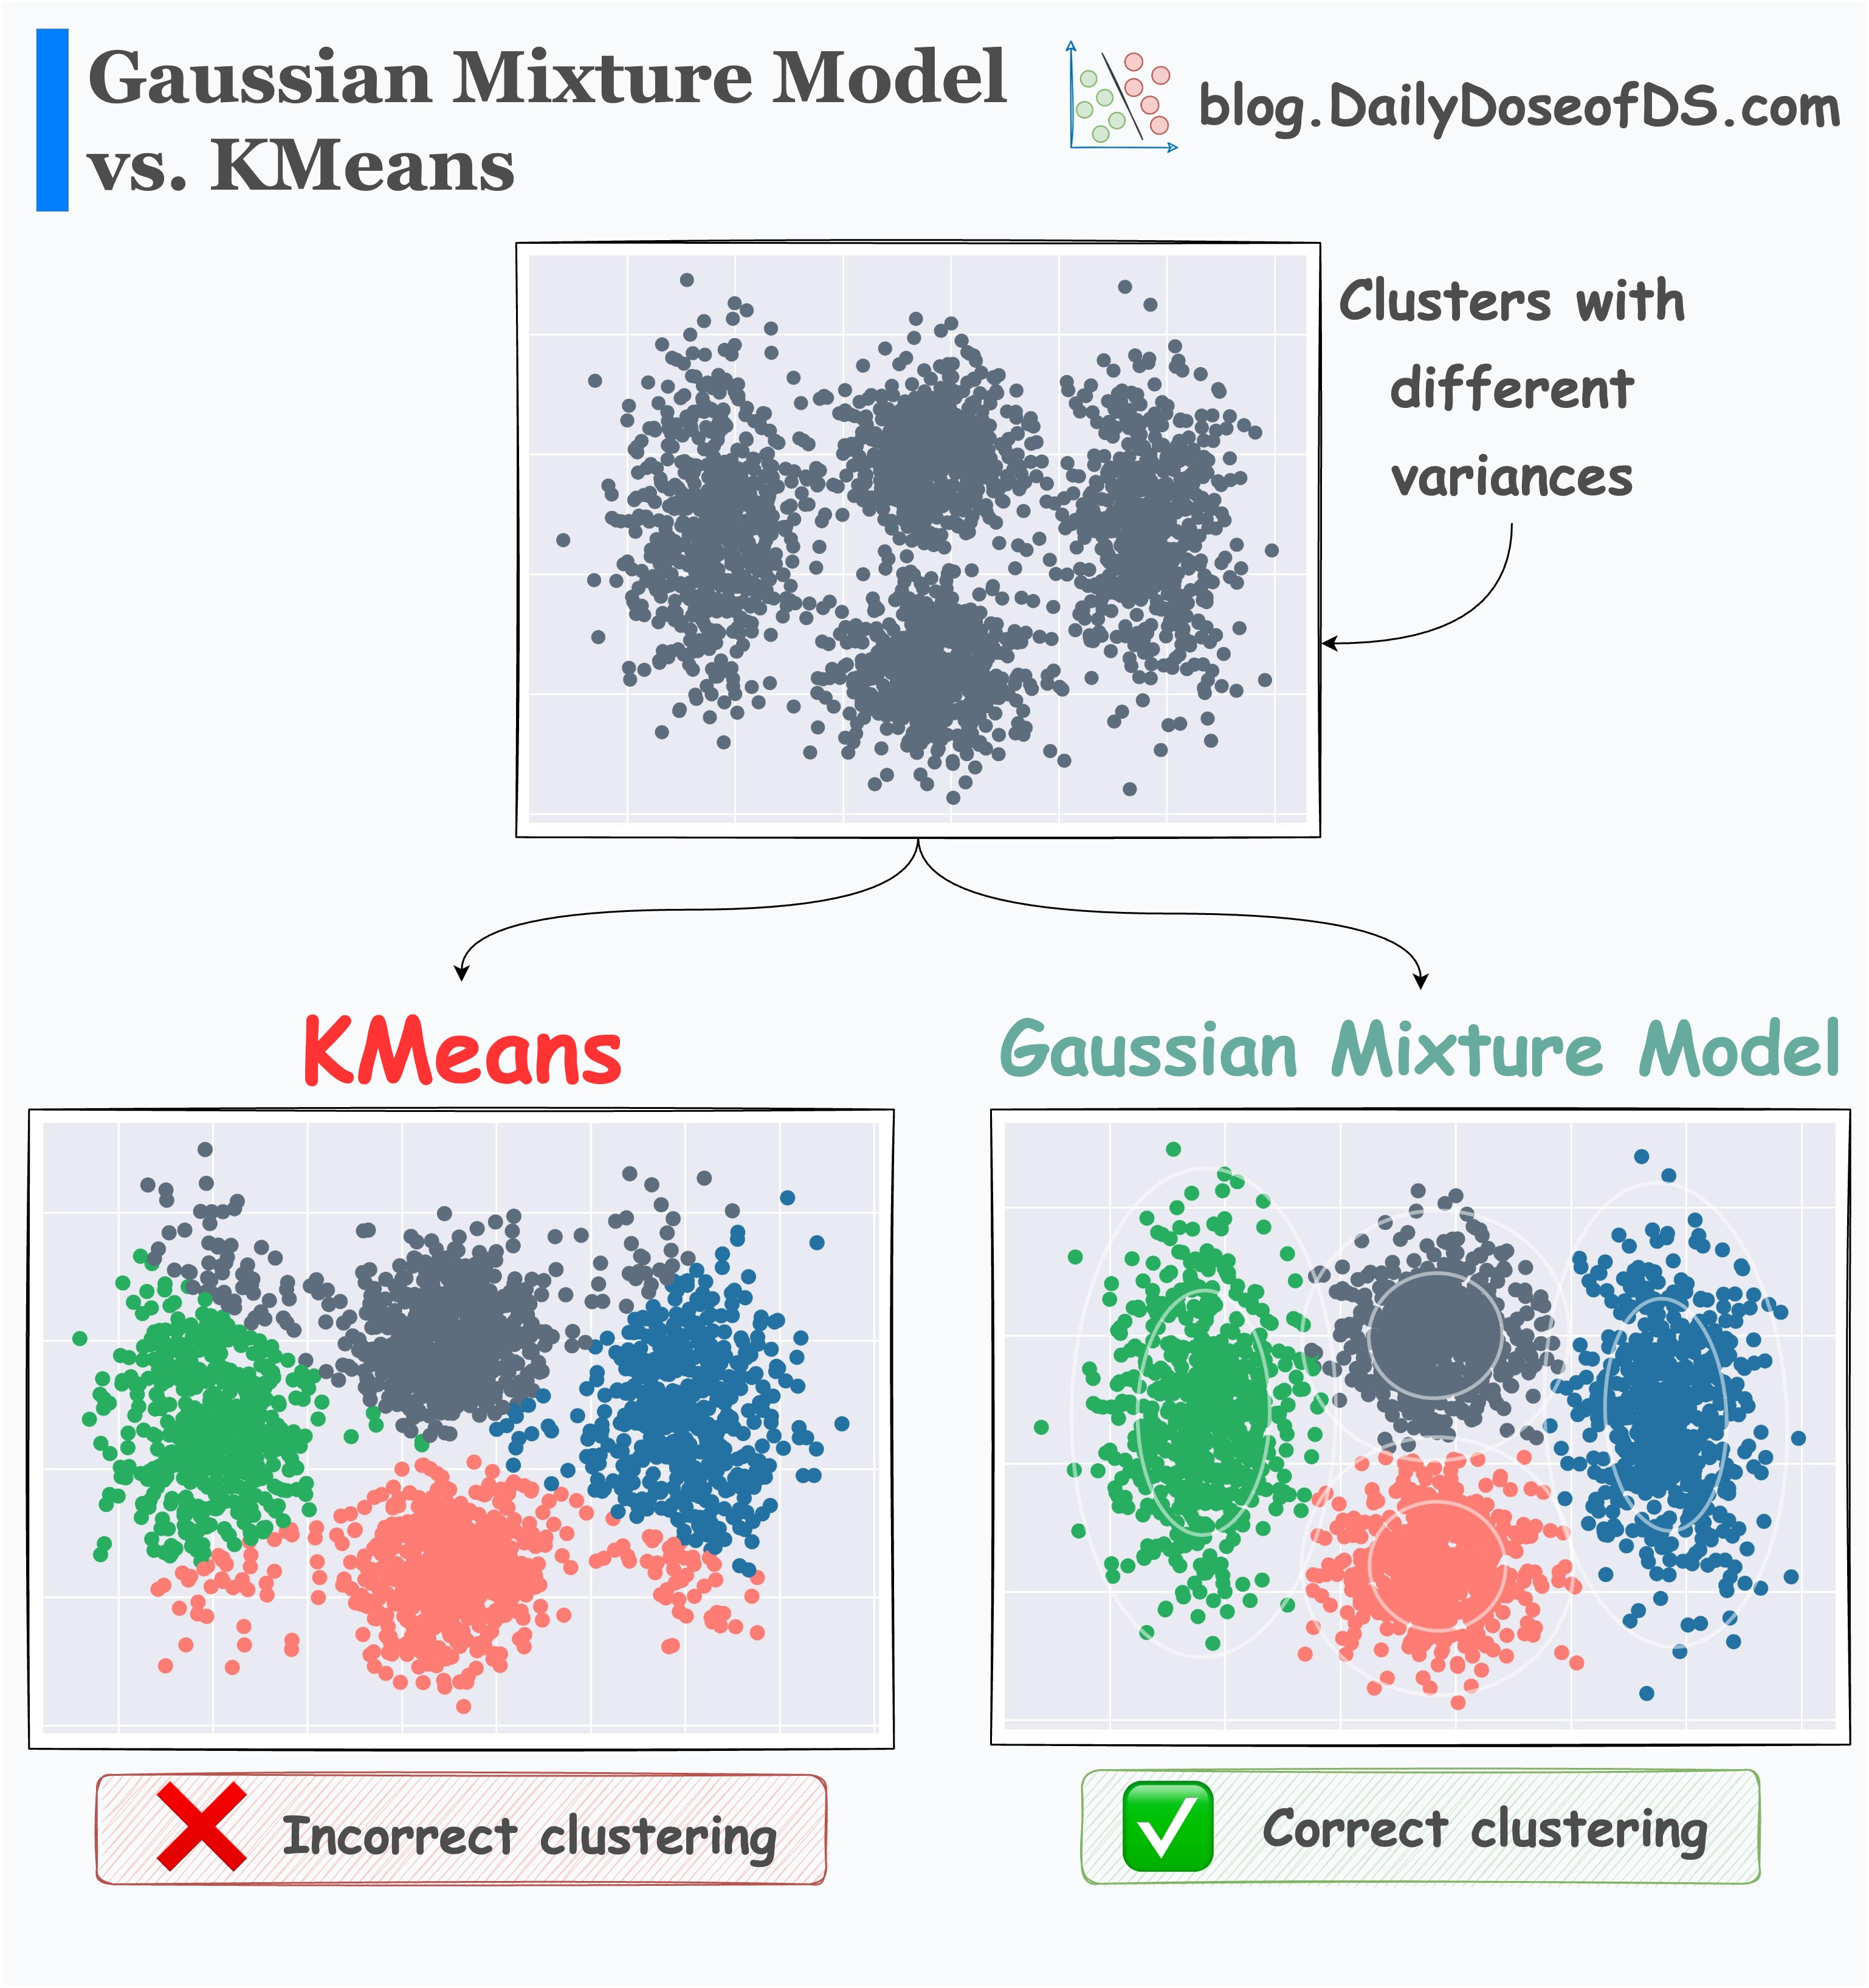 Gaussian Mixture Models: The Flexible Twin of KMeans